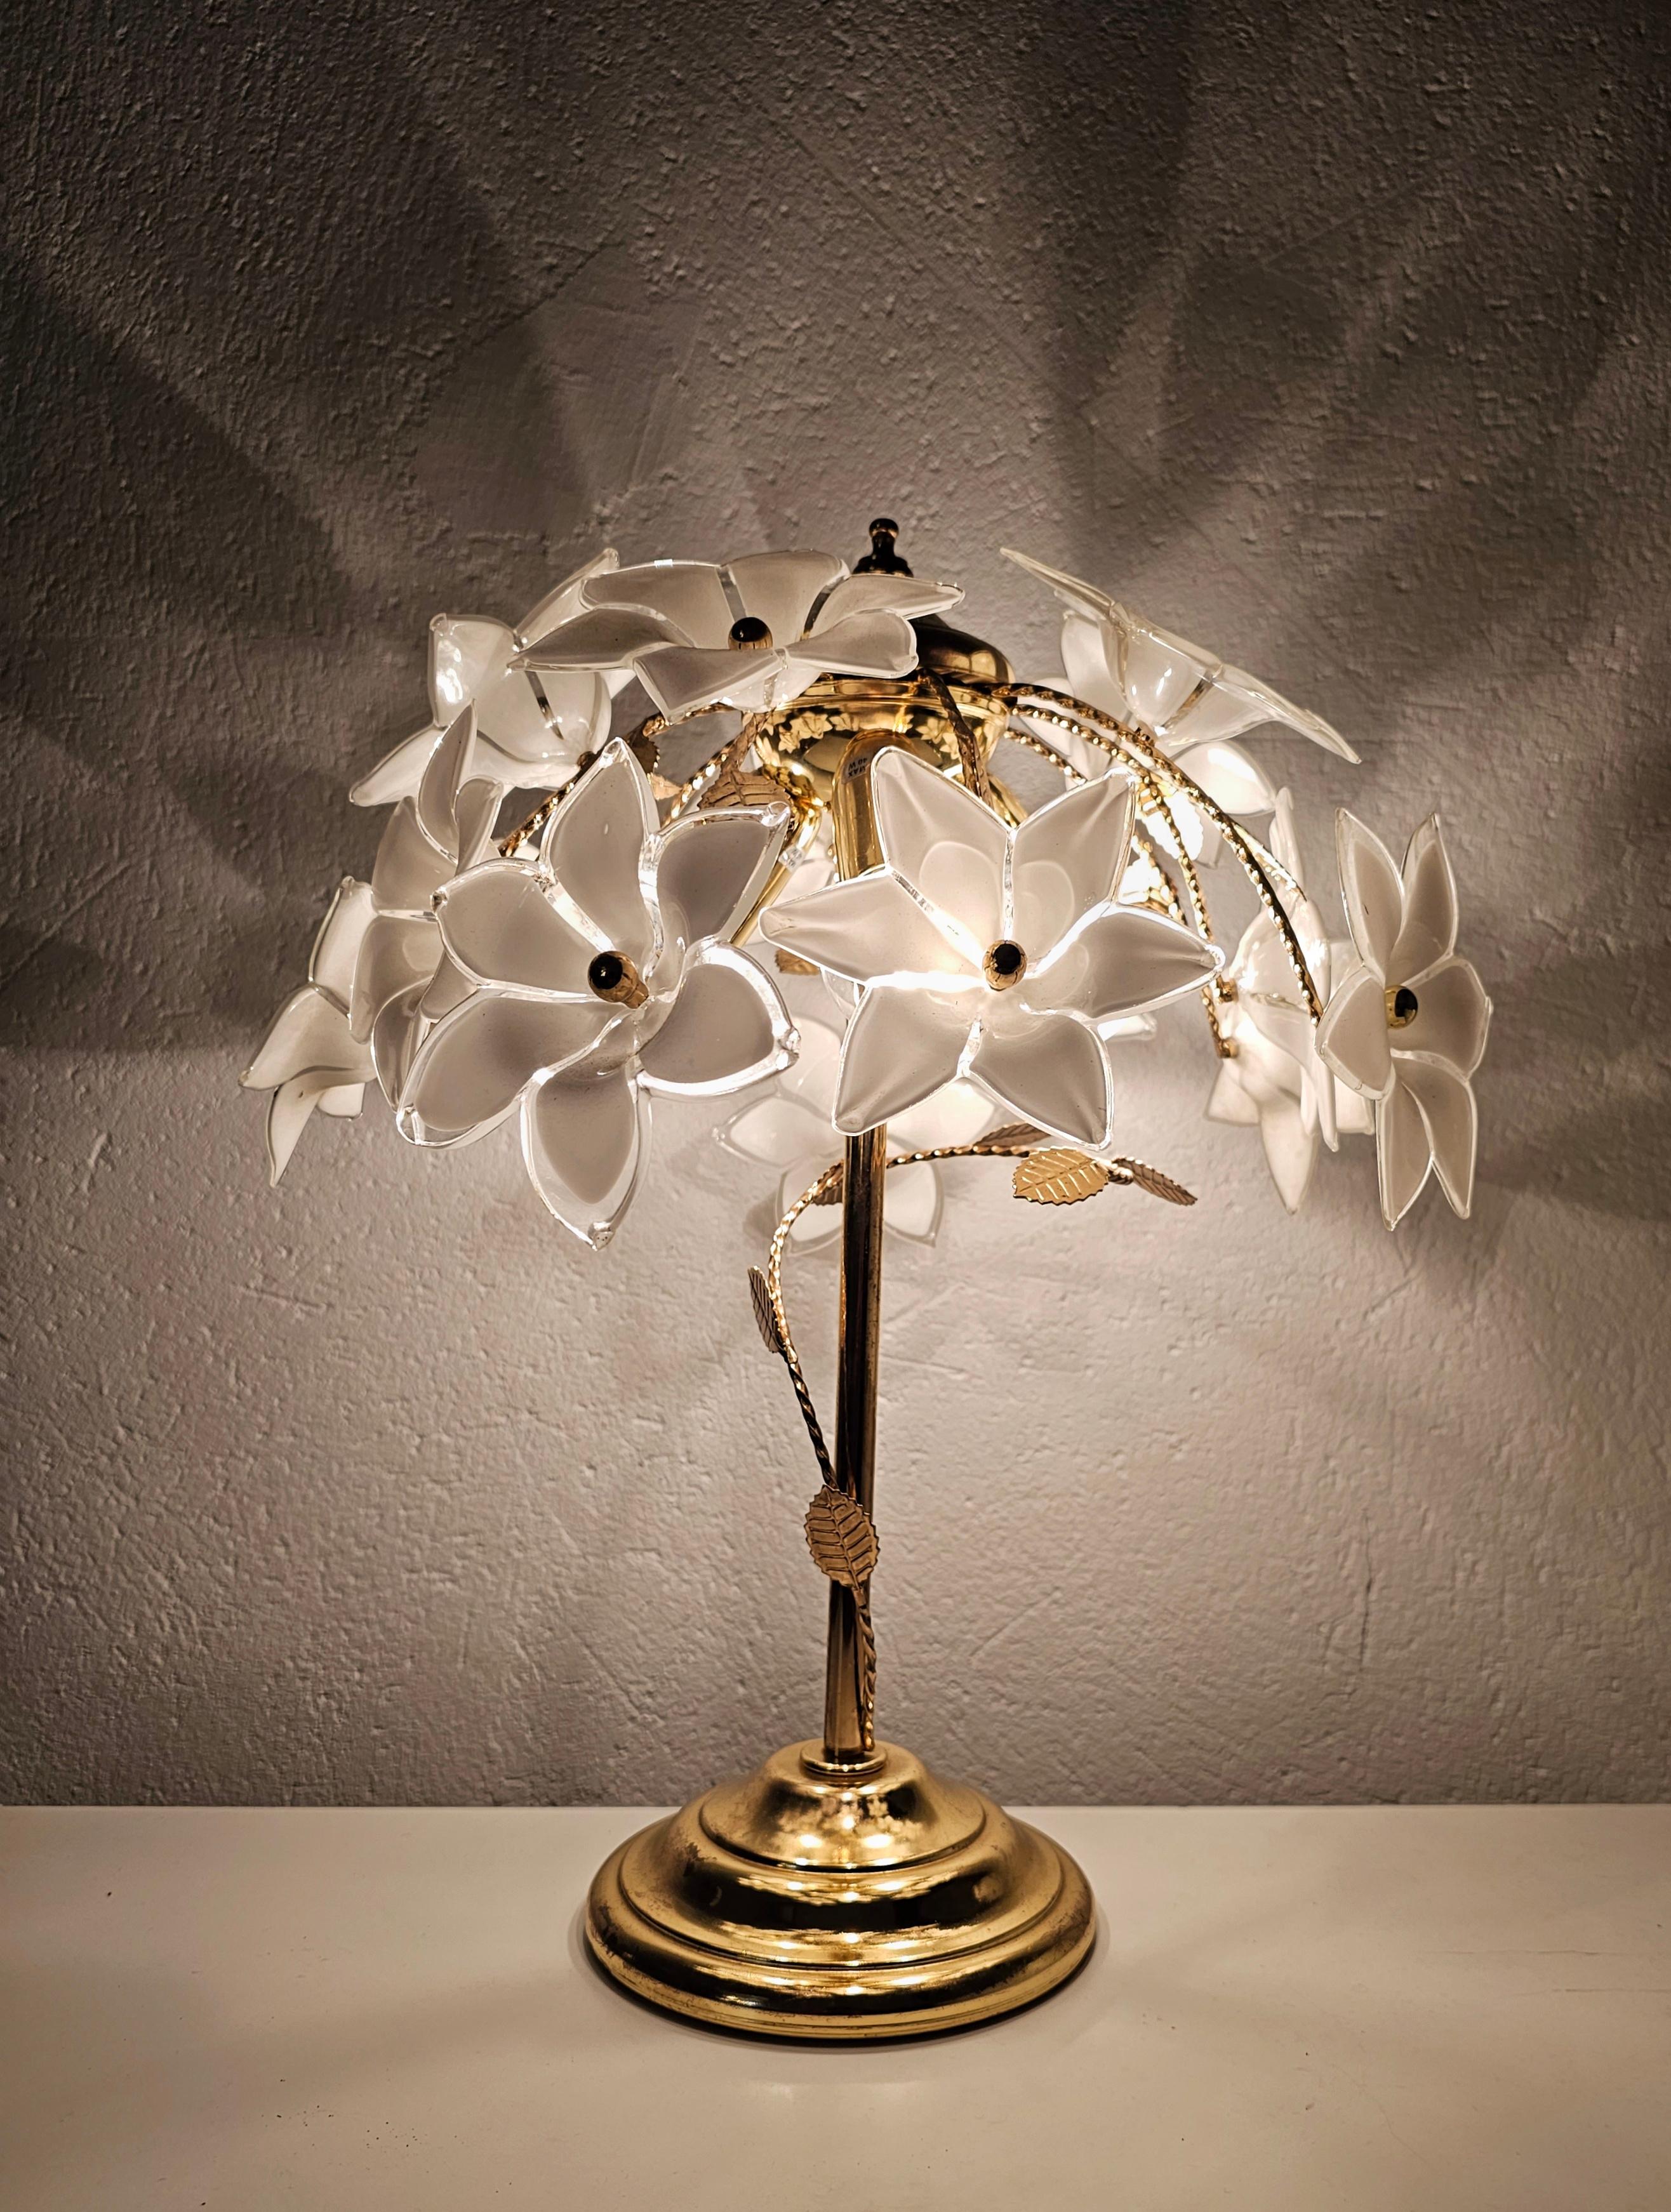 This listing features a beautiful, mid century modern table lamp, which was made in Murano, Italy. It consists of the gold-plated stand with floral ornaments and 15 frangipani flowers made of white and clear Murano glass.

Very rare piece! You can